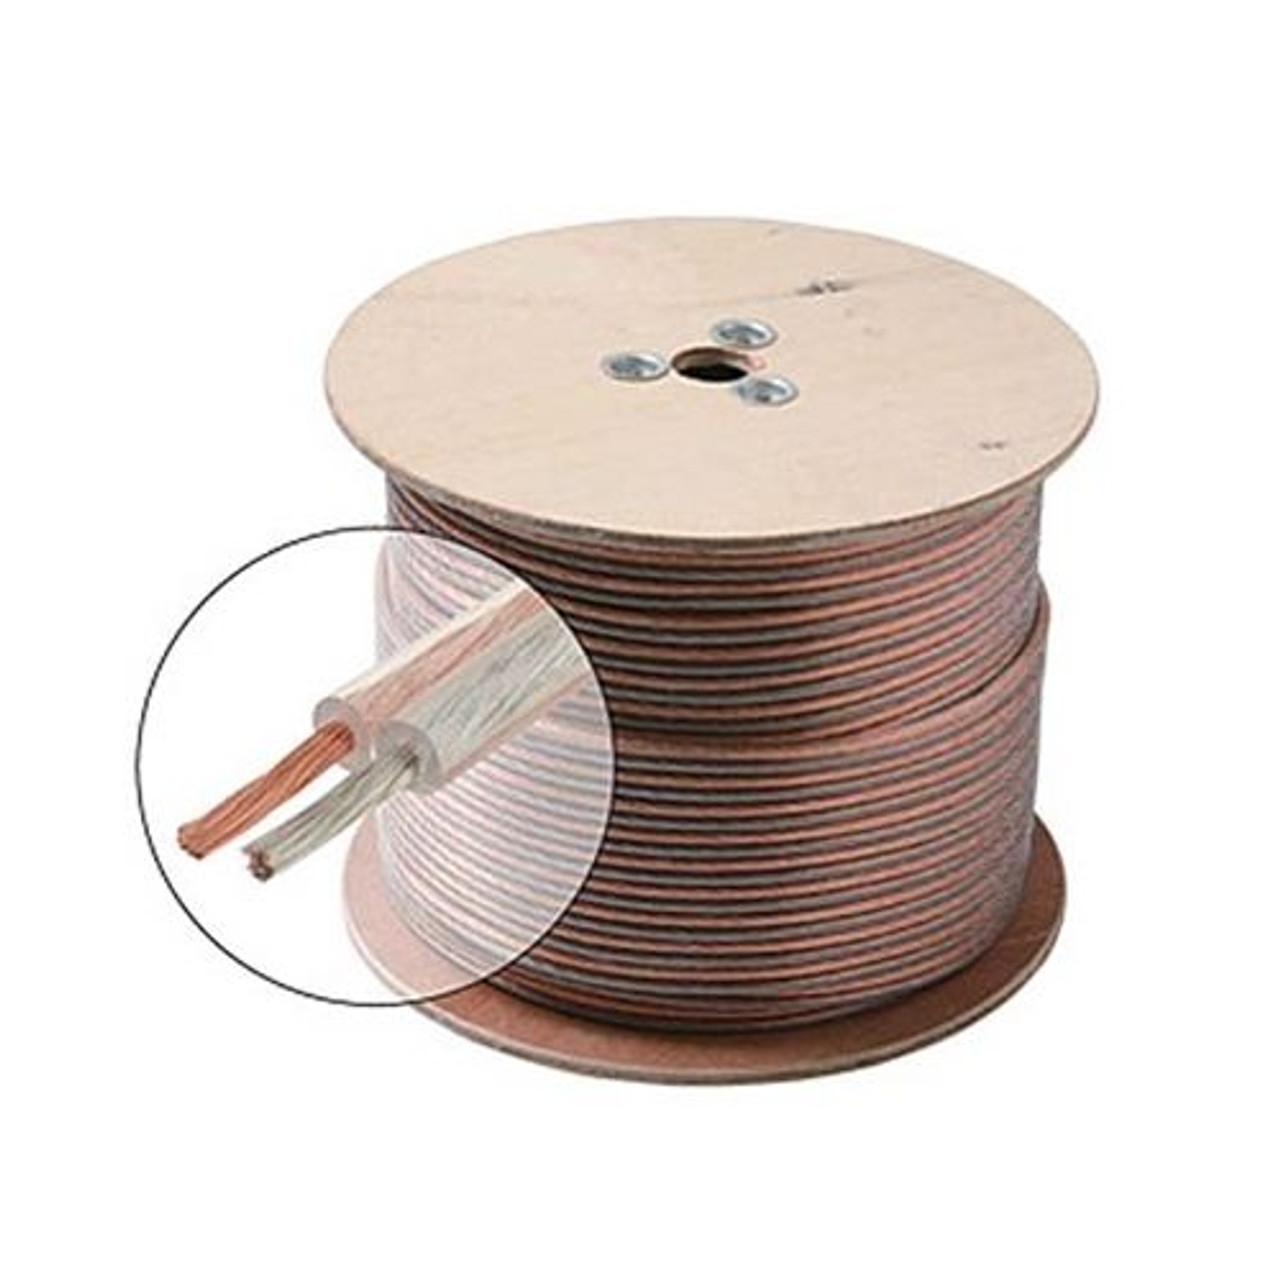 Steren 255-318-100 100 FT 18 AWG GA Speaker Cable 2 Conductor Oxygen Free Clear Stranded Flexible Copper Polarized 2-Wire Bulk 18 Gauge Speaker Cable, 100 FT, Part # 255-318-100